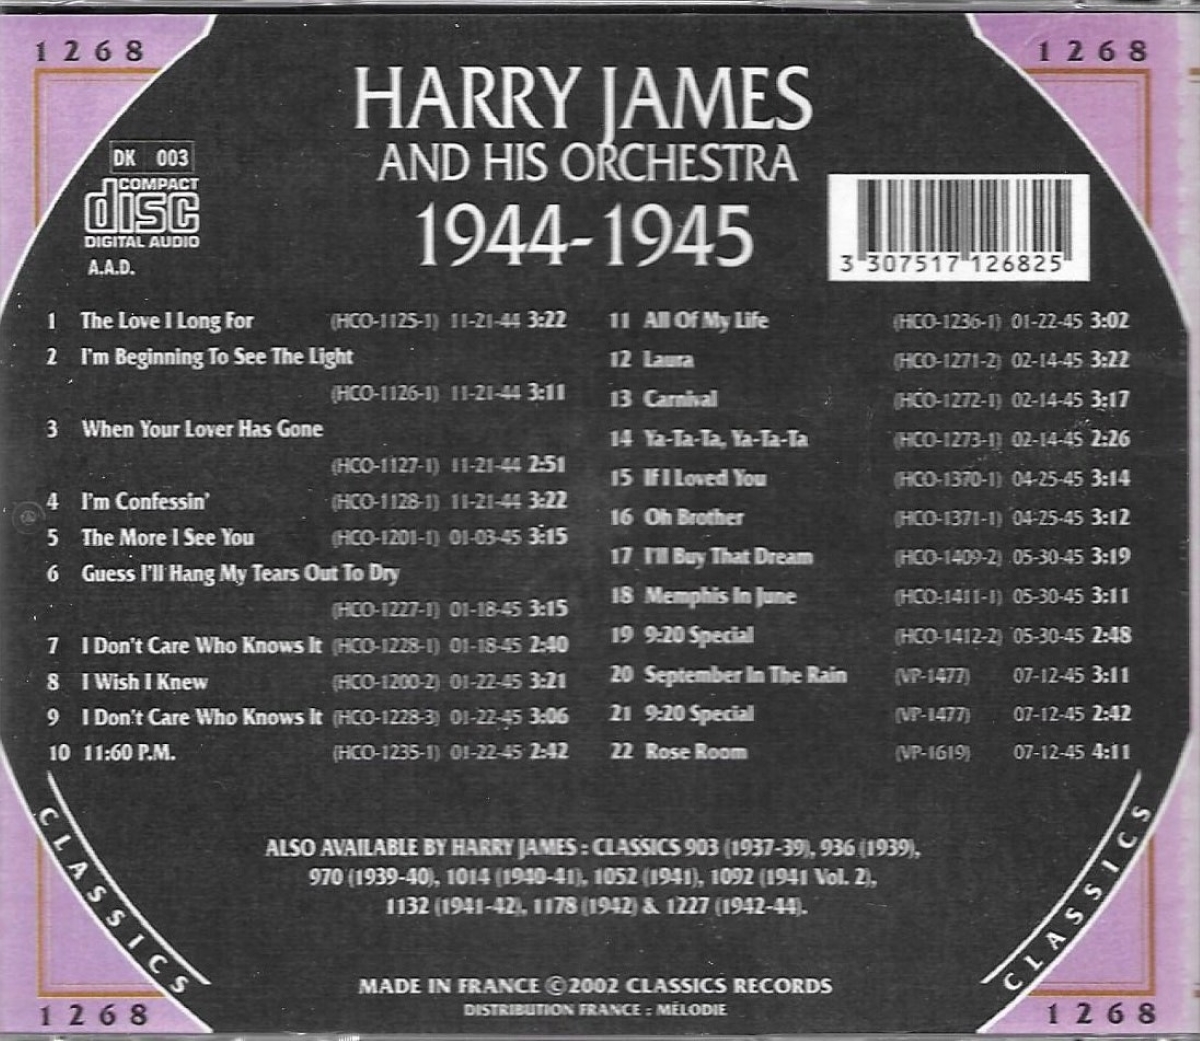 The Chronological Harry James And His Orchestra: 1944-1945